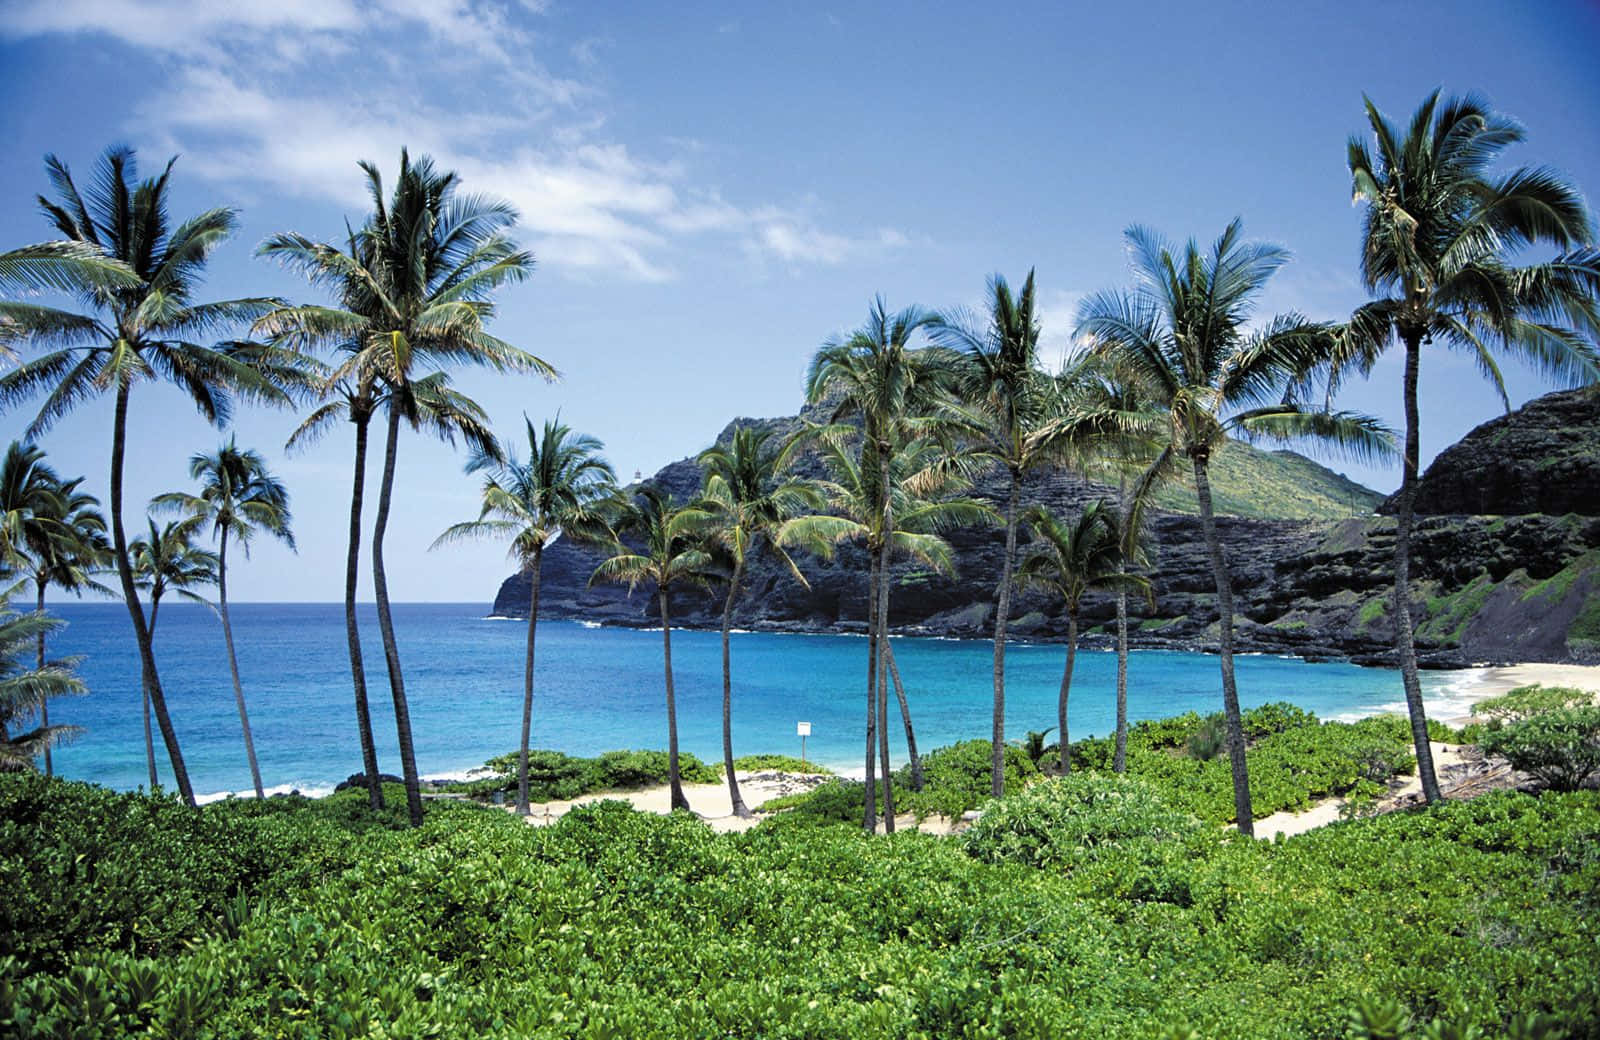 A Beach With Palm Trees And A Rocky Shore